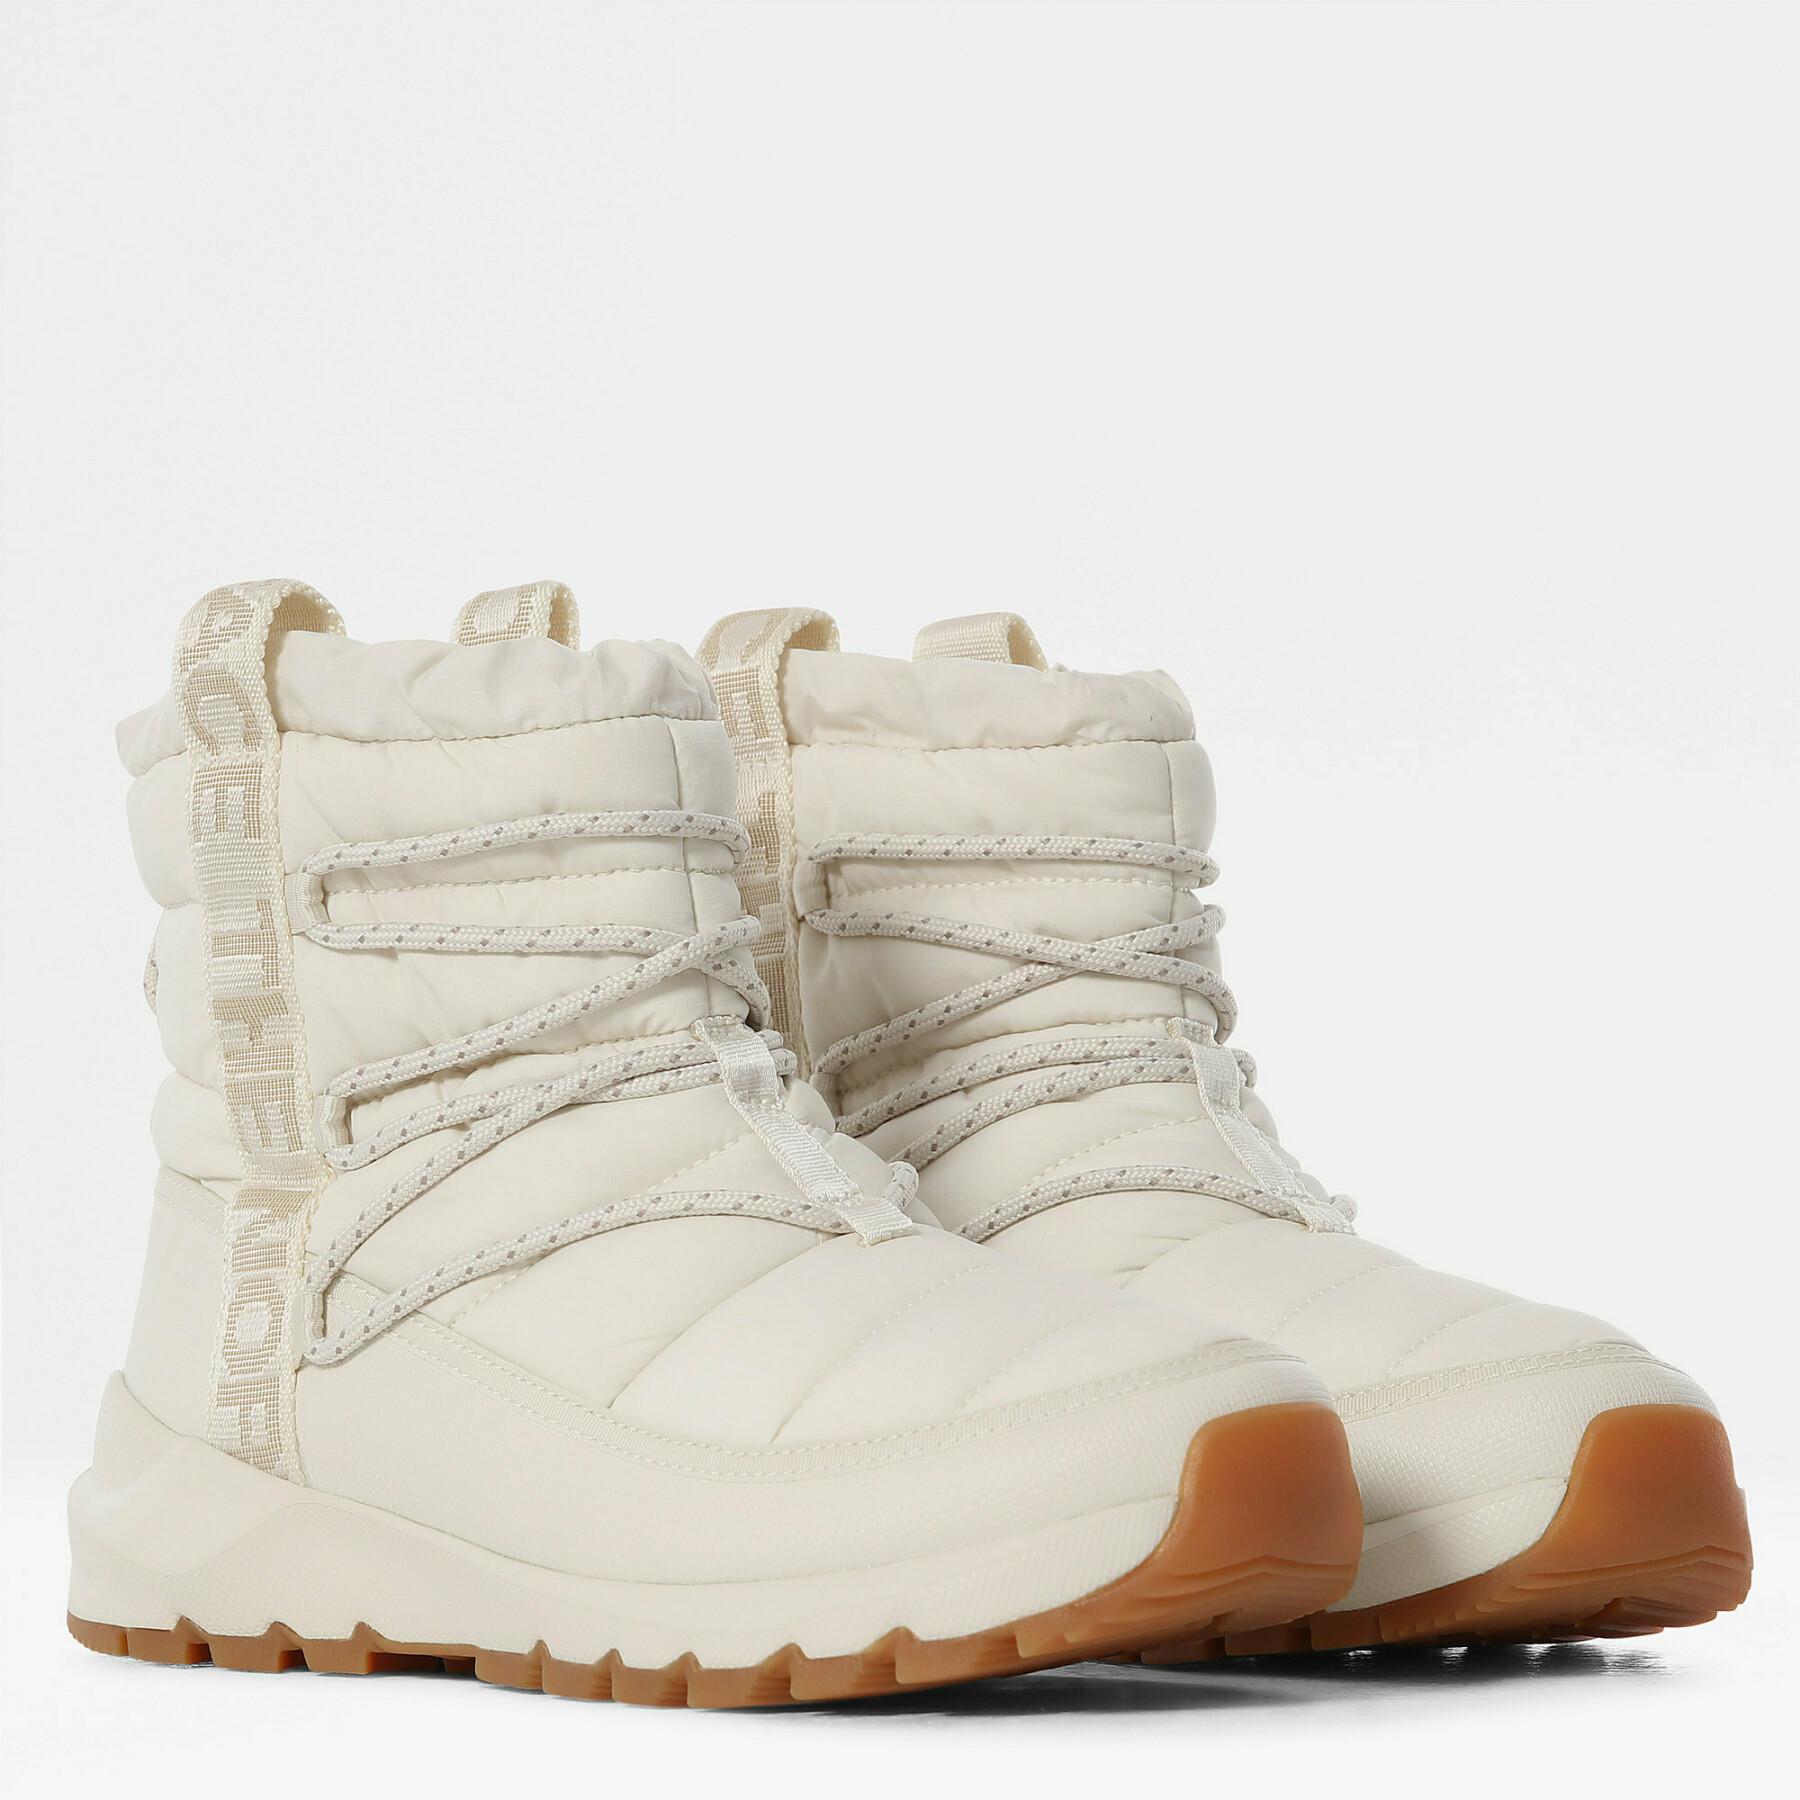 Women's boots The North Face Thermoball